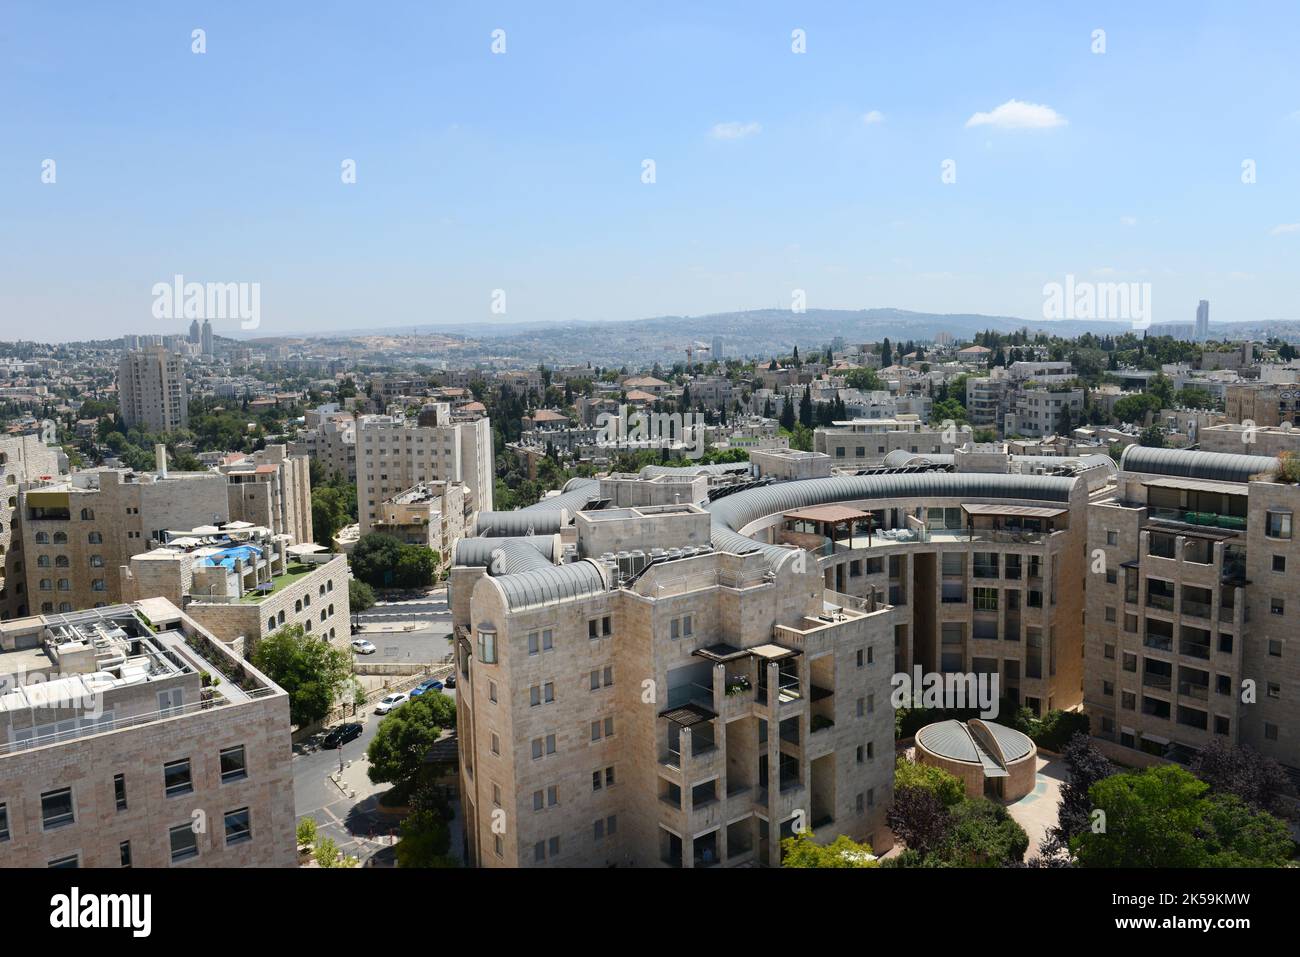 Views of South Eastern Jerusalem as seen from the top of the YMCA building on King David St in Jerusalem, Israel. Stock Photo